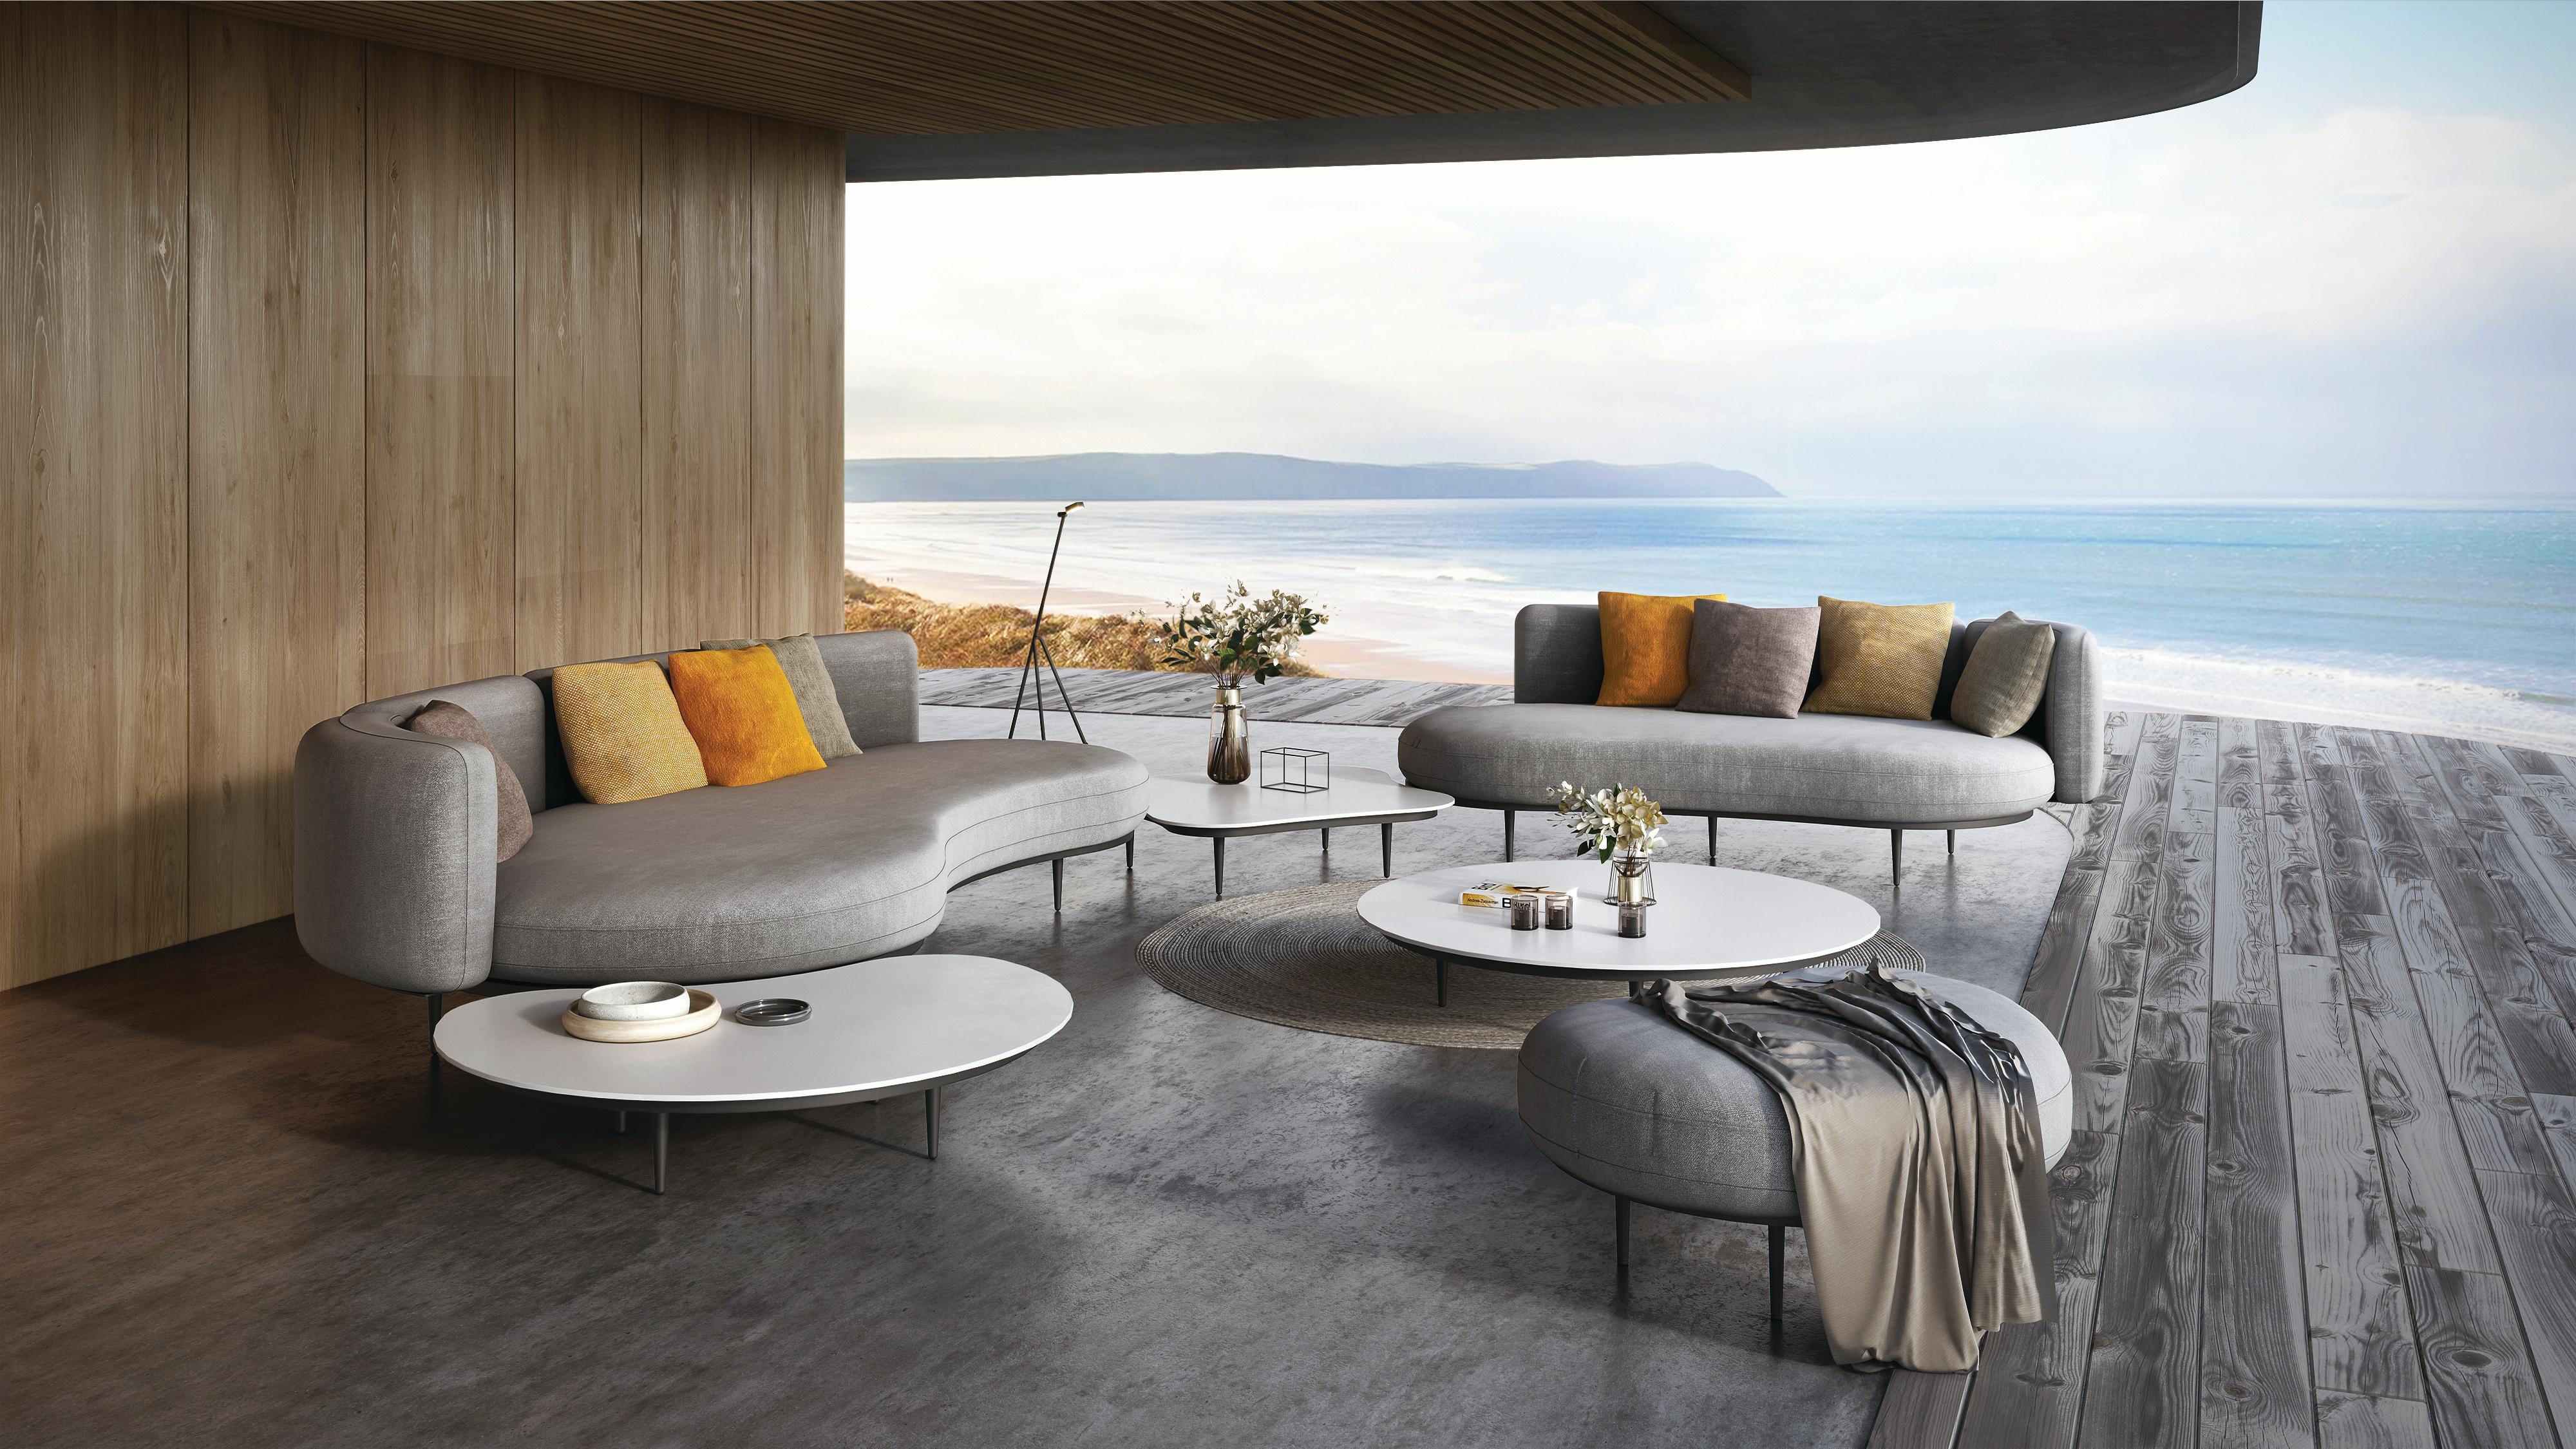 Organix outdoor louge set design by Kris Van Puyvelde.
Brand new collection to fit the Organic Outdoor Space for all seasons.
Additional Sofas, Coffee Tables, and Poufs available. 

includesNatura
(1) Organix 001 Sofa: Black Legs with Silver